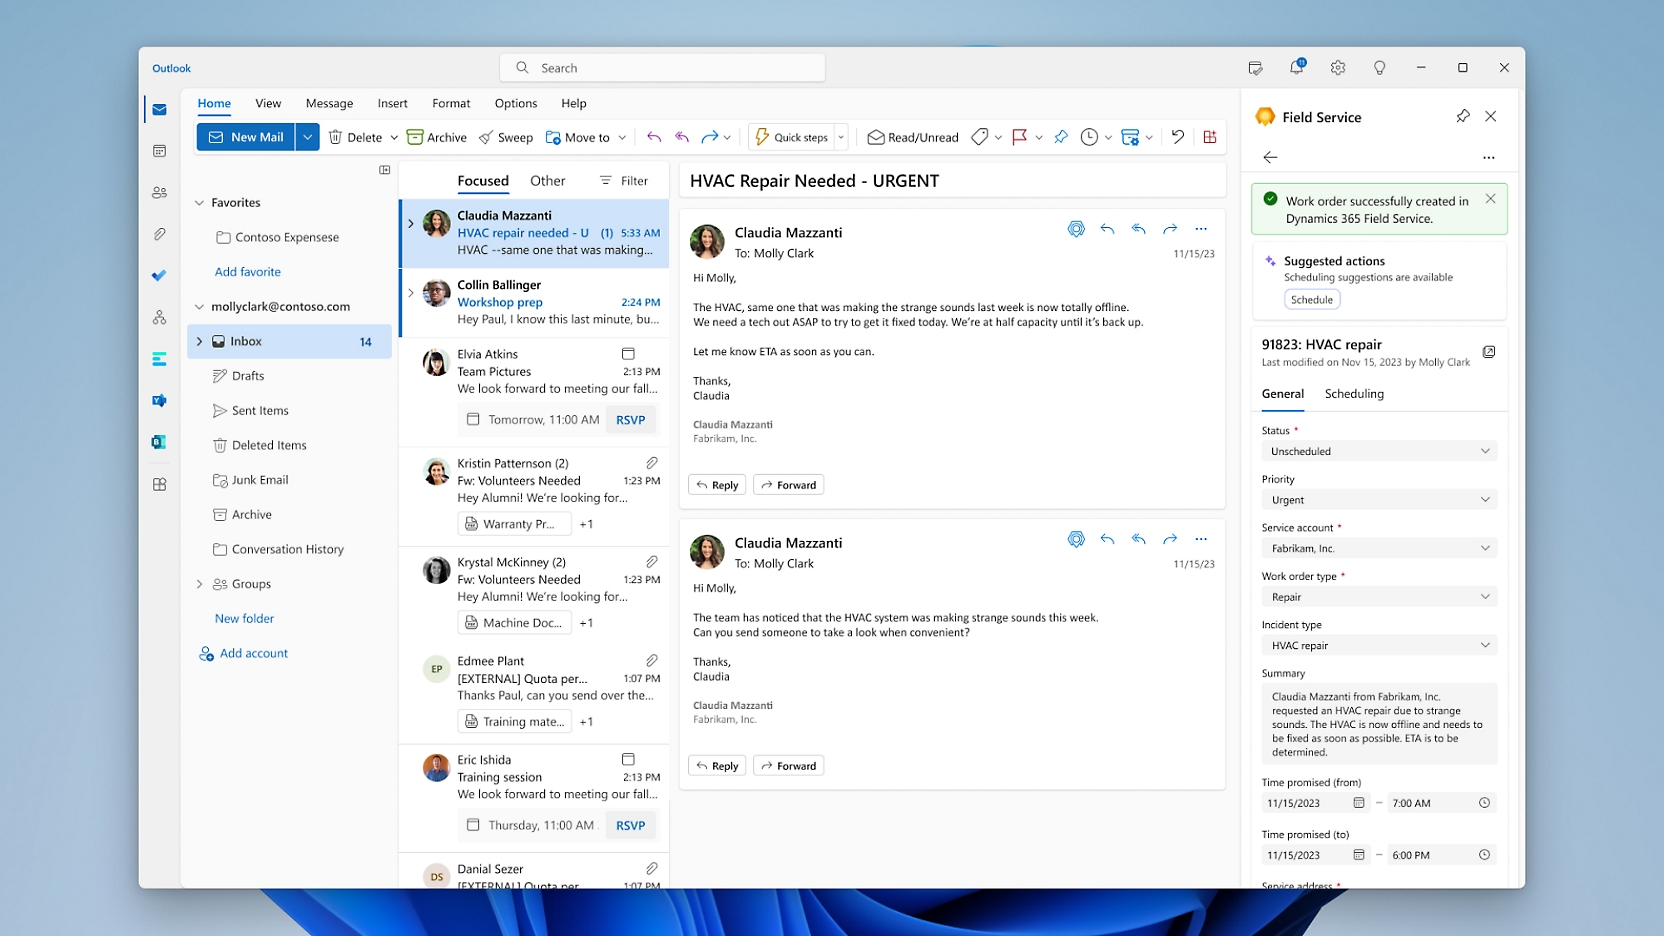 A screen shot of the Microsoft office email app.